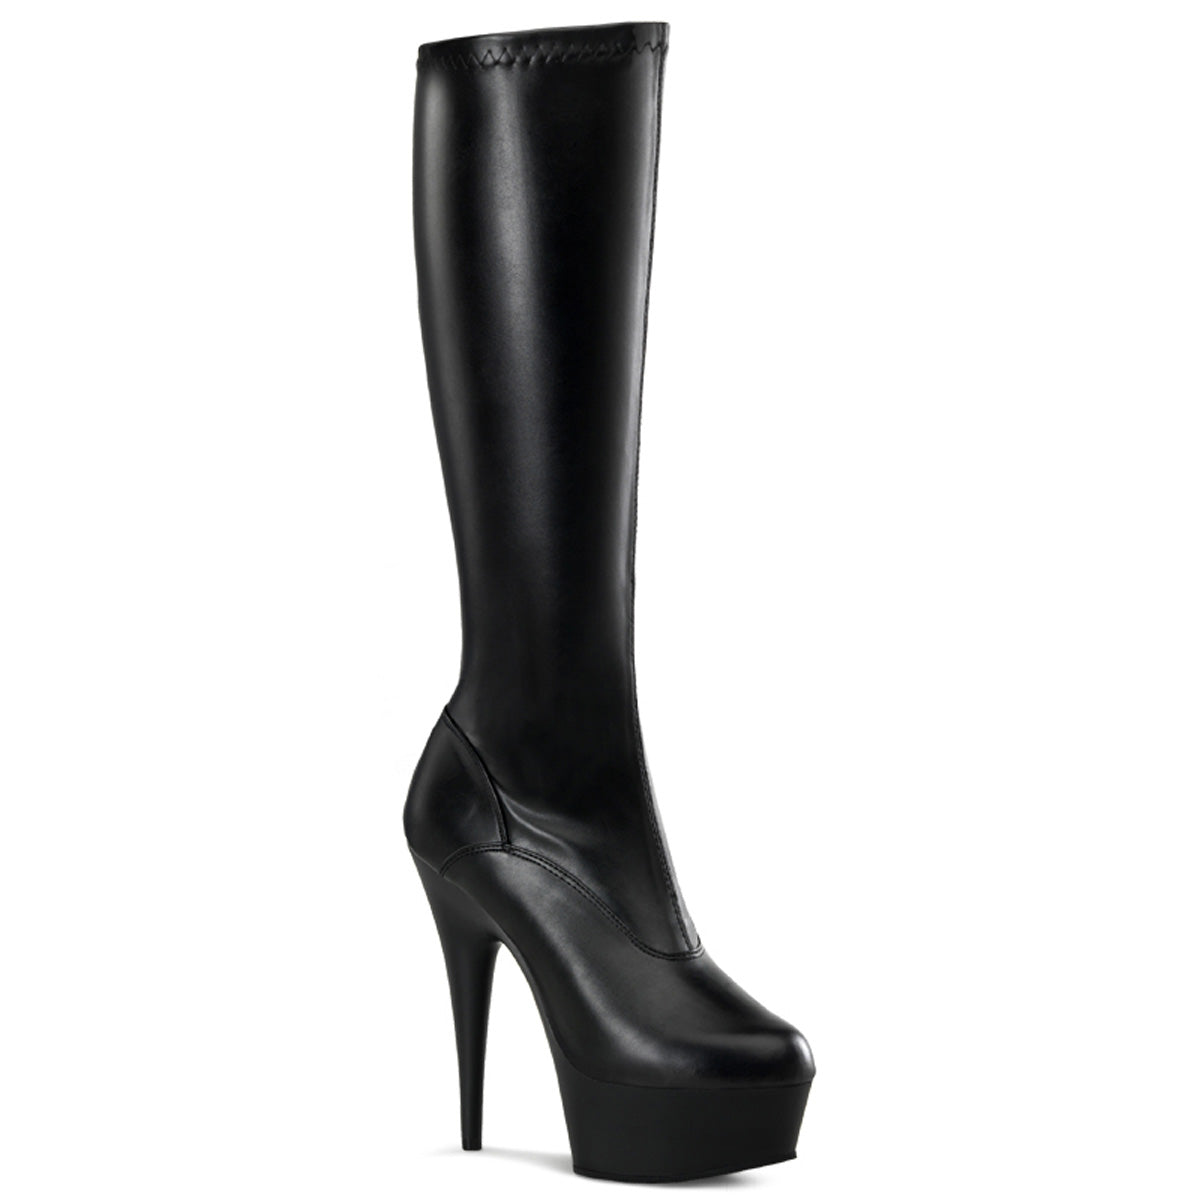 DELIGHT-2000 Black Knee High Boots